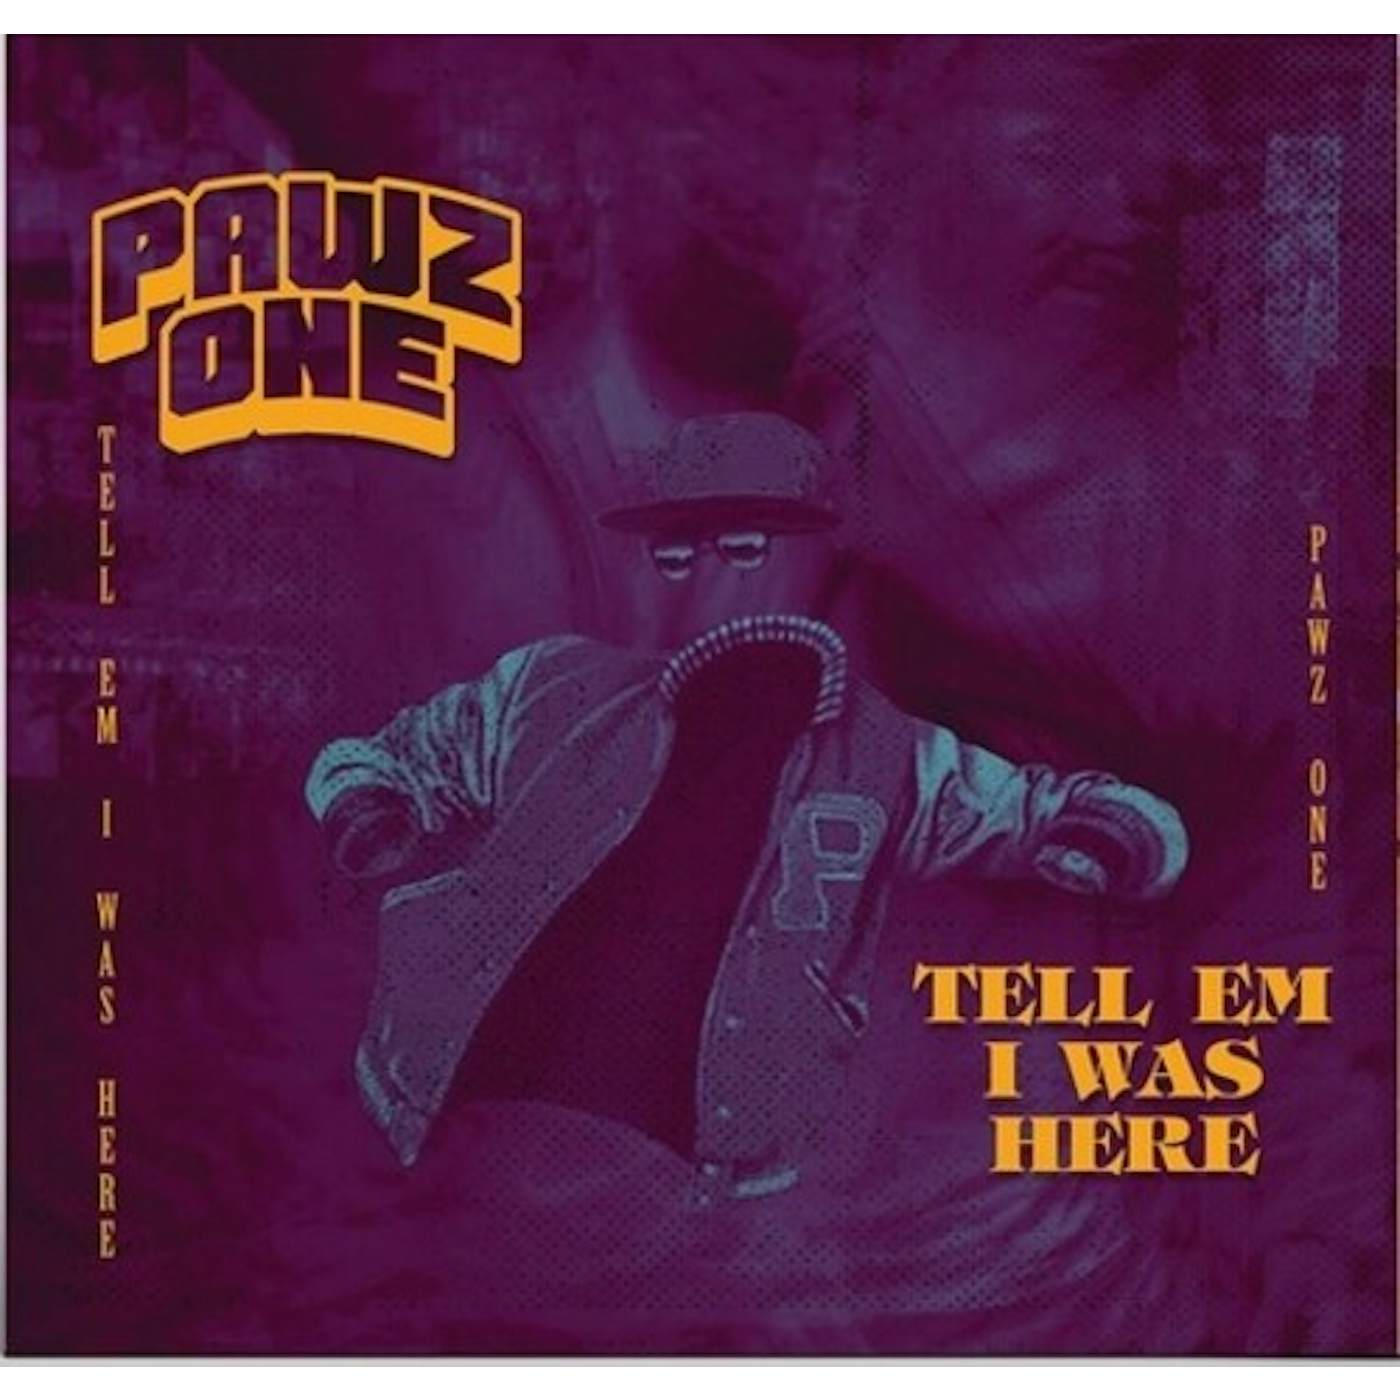 Pawz One TELL EM I WAS HERE Vinyl Record